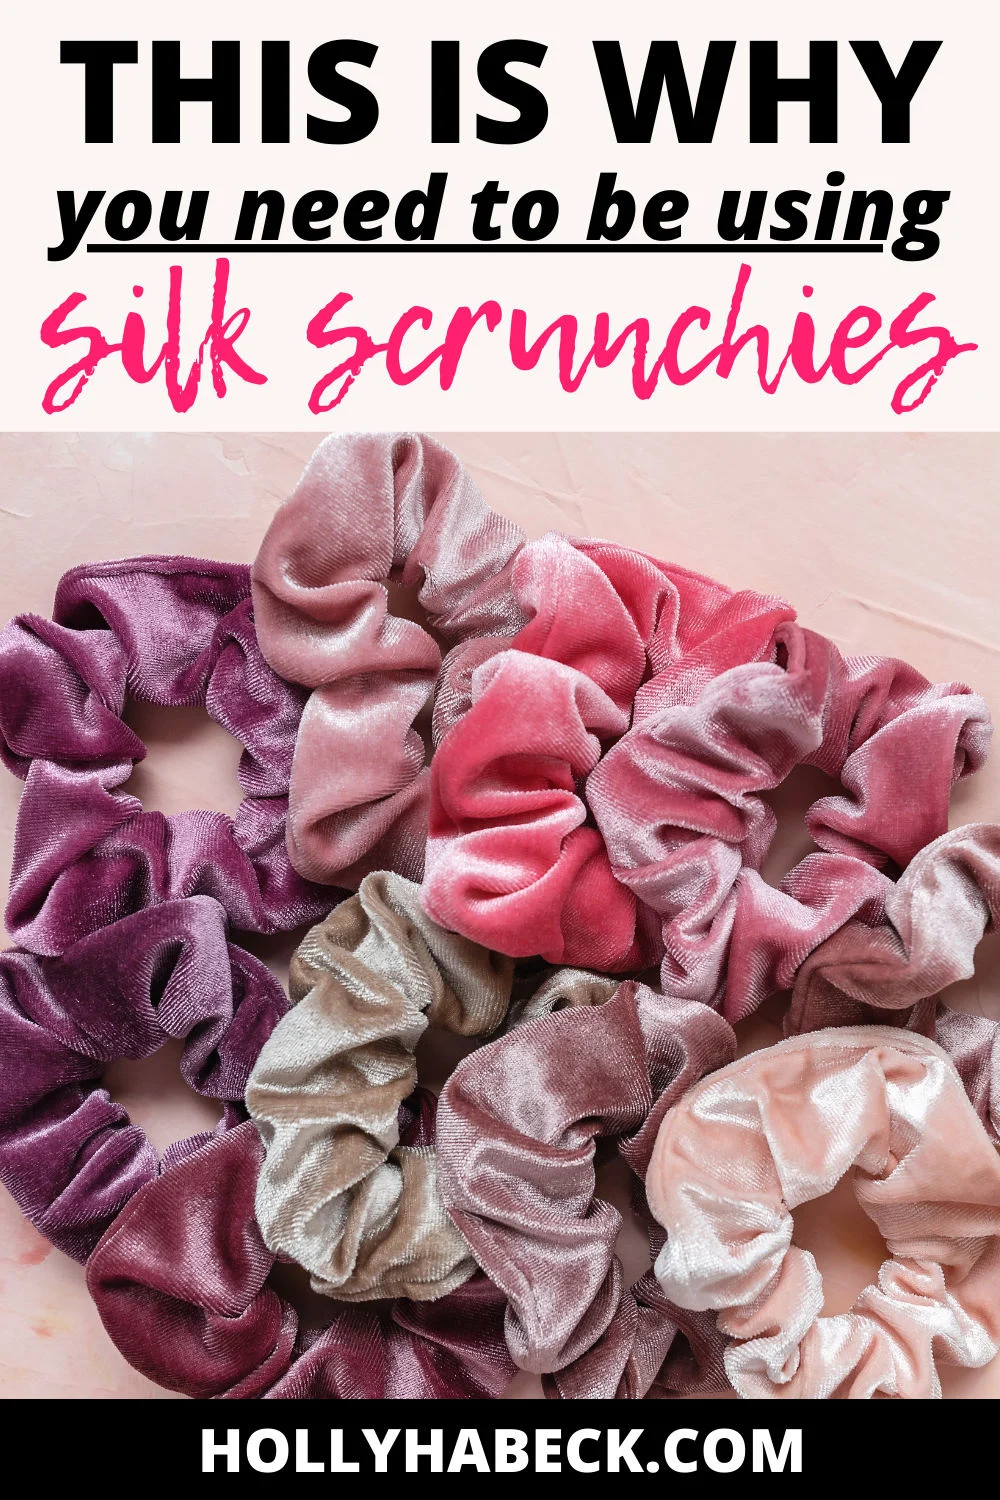 This Is Why You Need to Be Using Silk Scrunchies